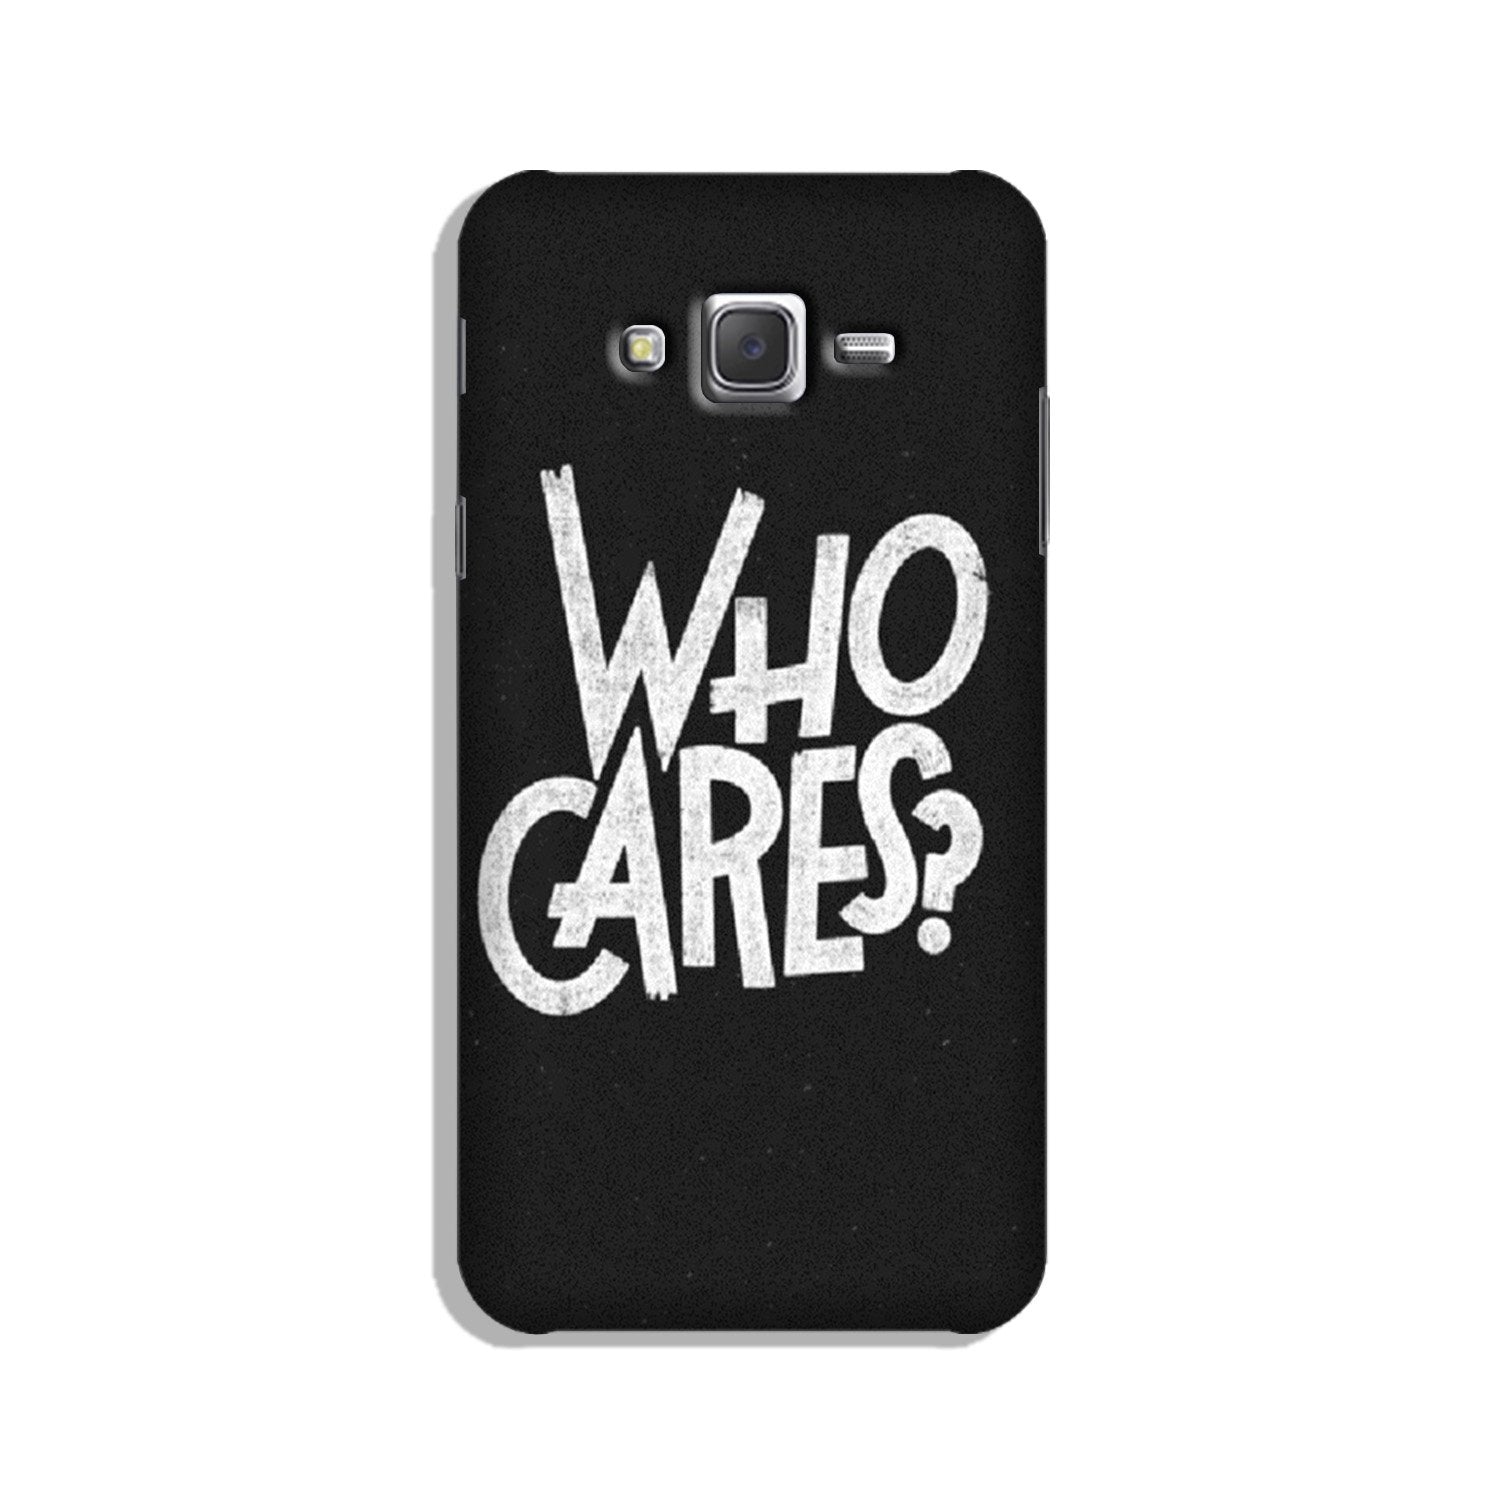 Who Cares Case for Galaxy J7 (2015)